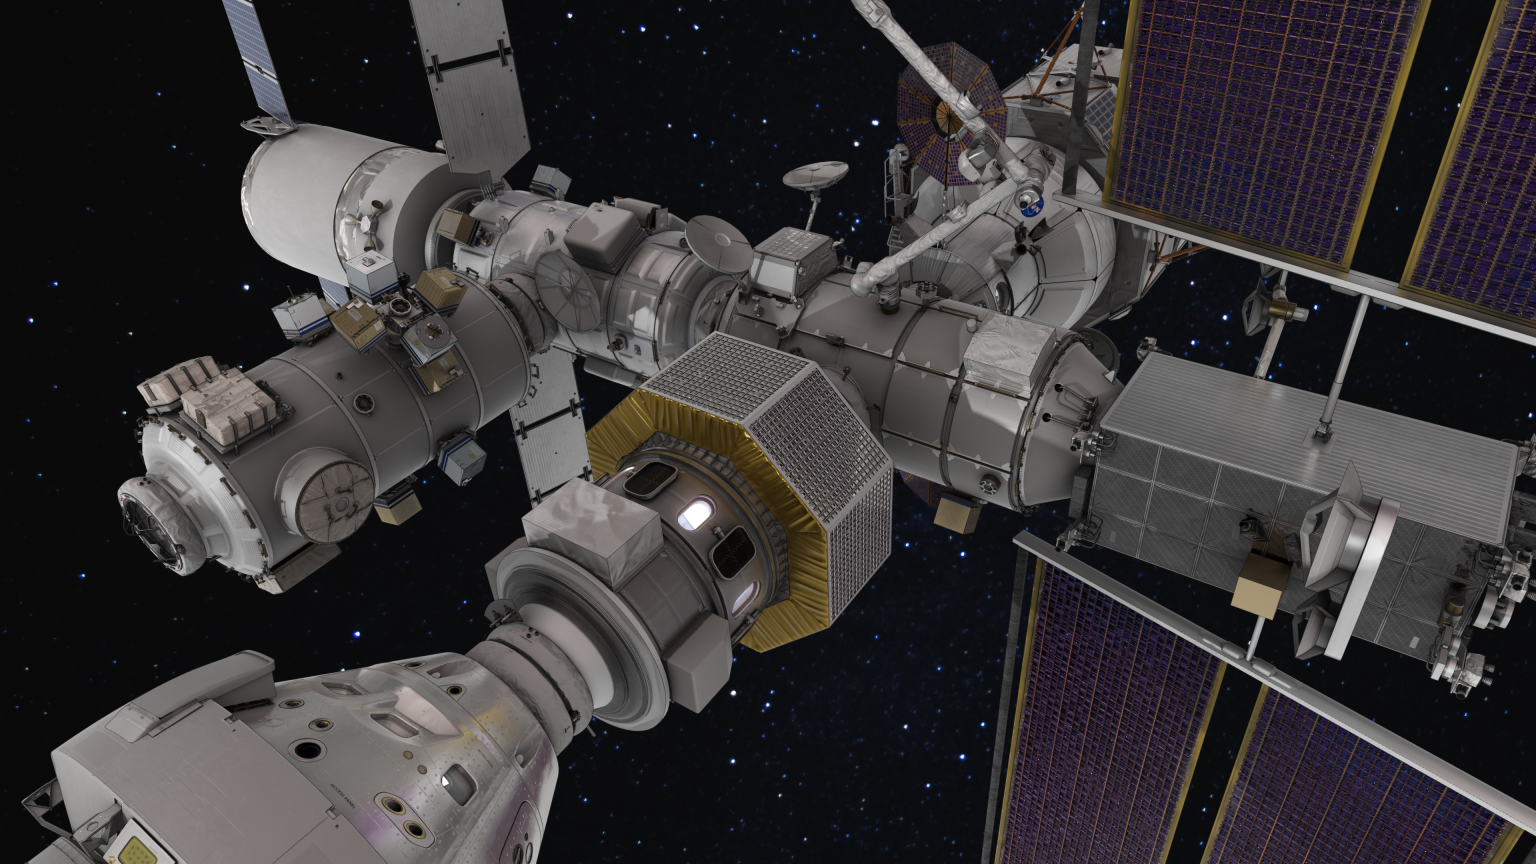 The Gateway is a lunar outpost that will provide a platform for humans to perform science